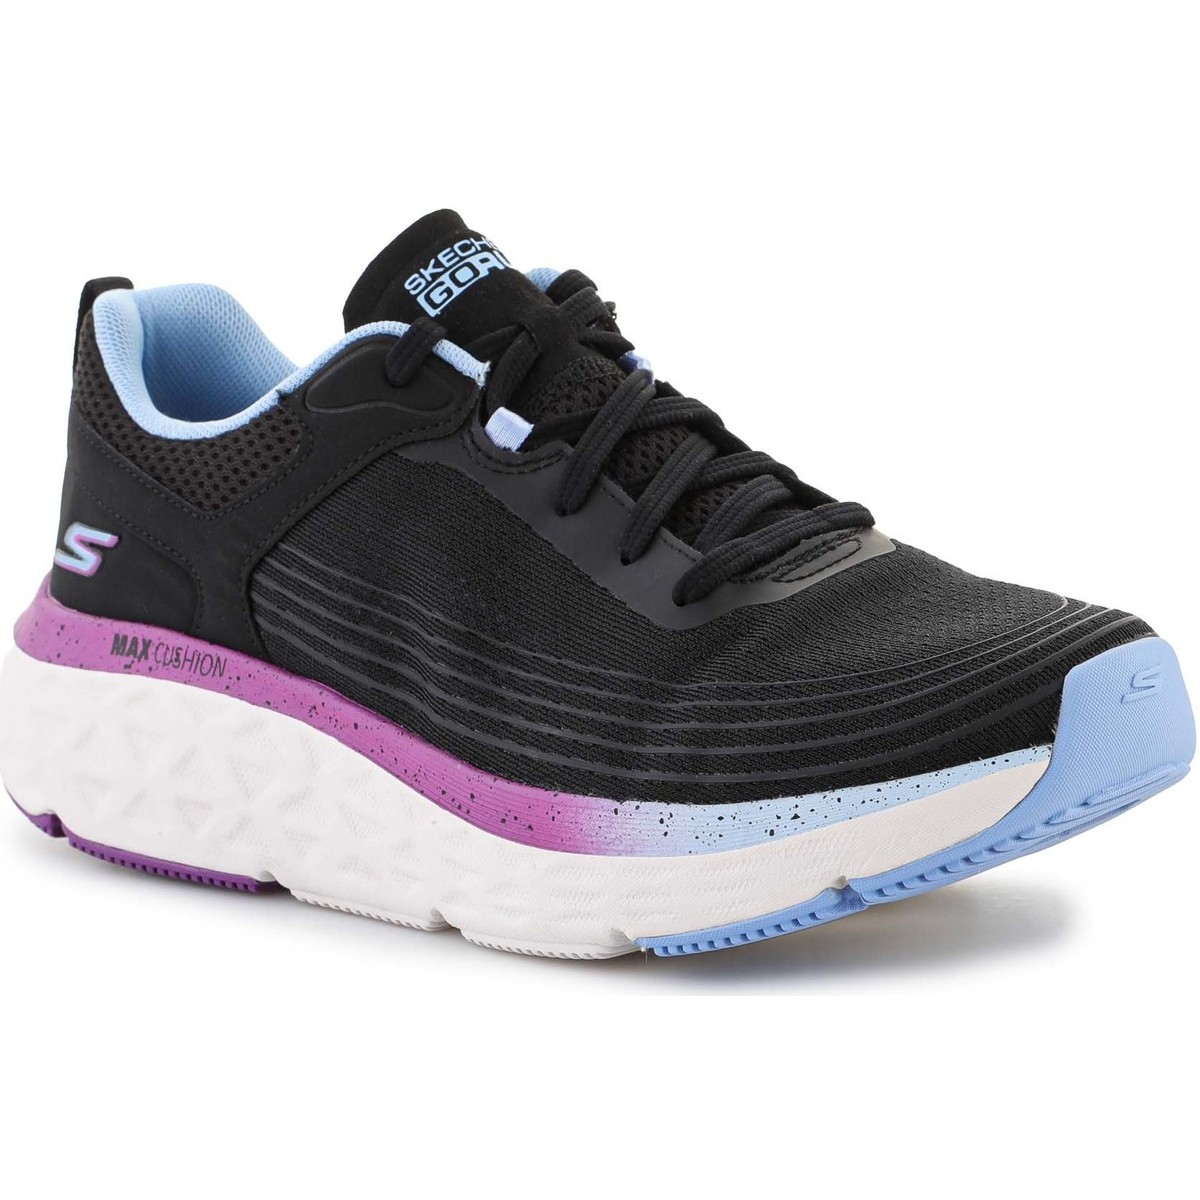 Xαμηλά Sneakers Skechers Max Cushioning Delta – Sunny Road 129118-BKBL